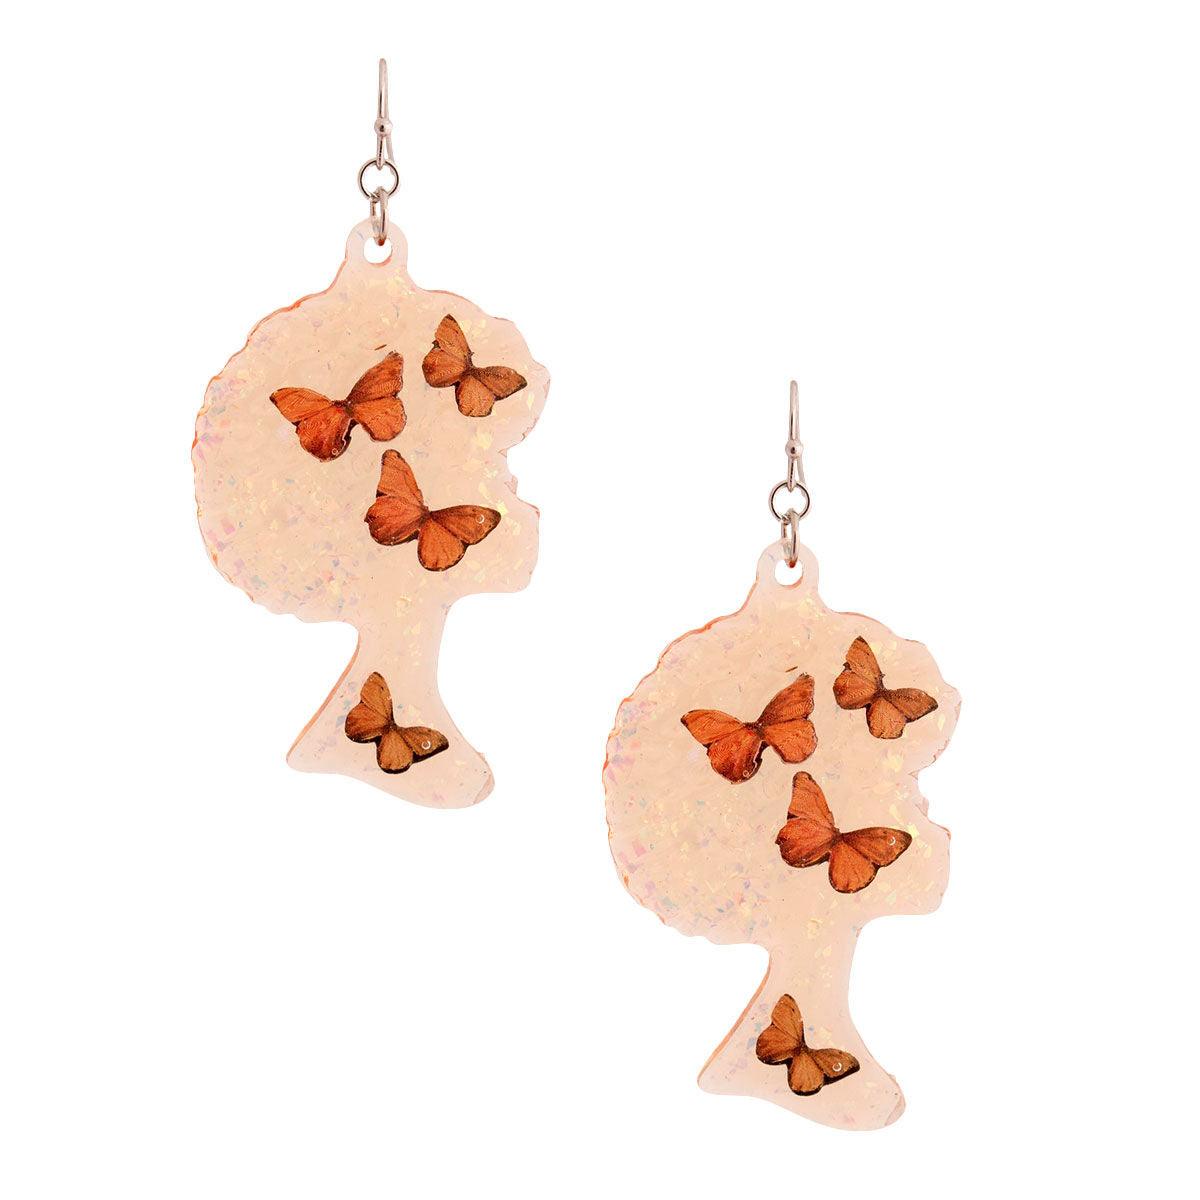 Get Your Orange Afro Butterfly Earrings Here - Perfect Accessory!